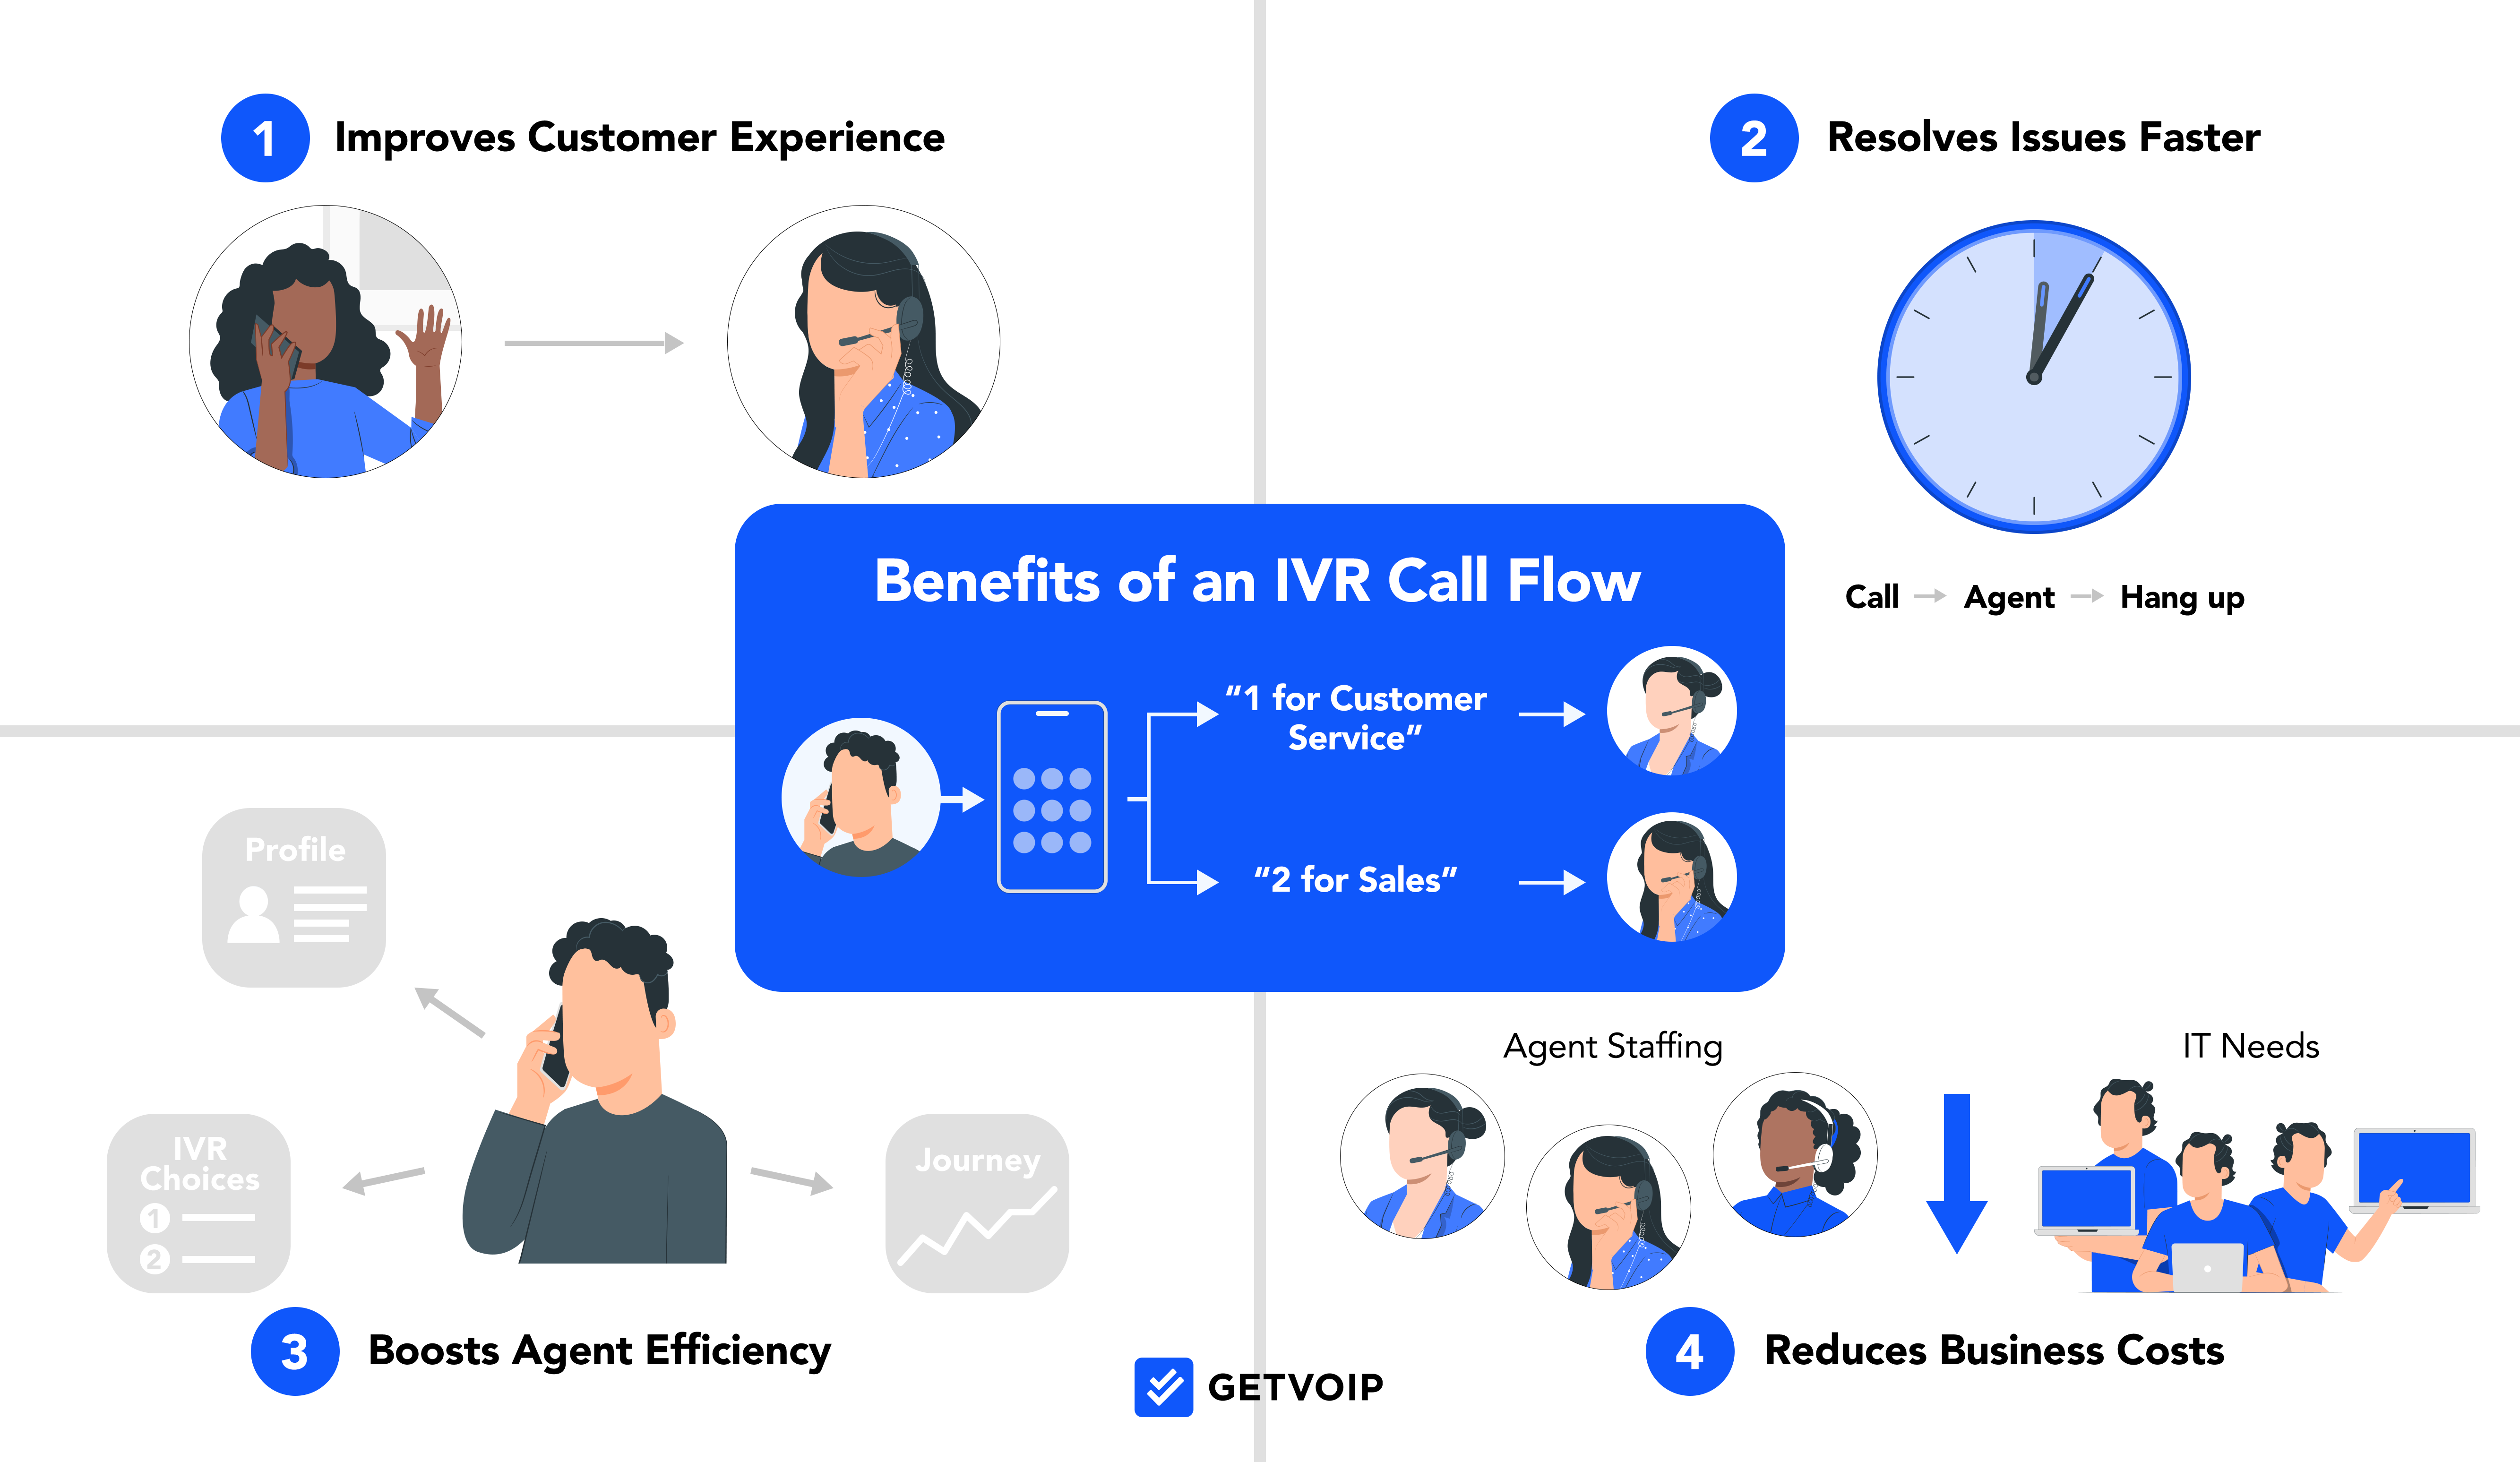 Benefits of IVR Call Flow